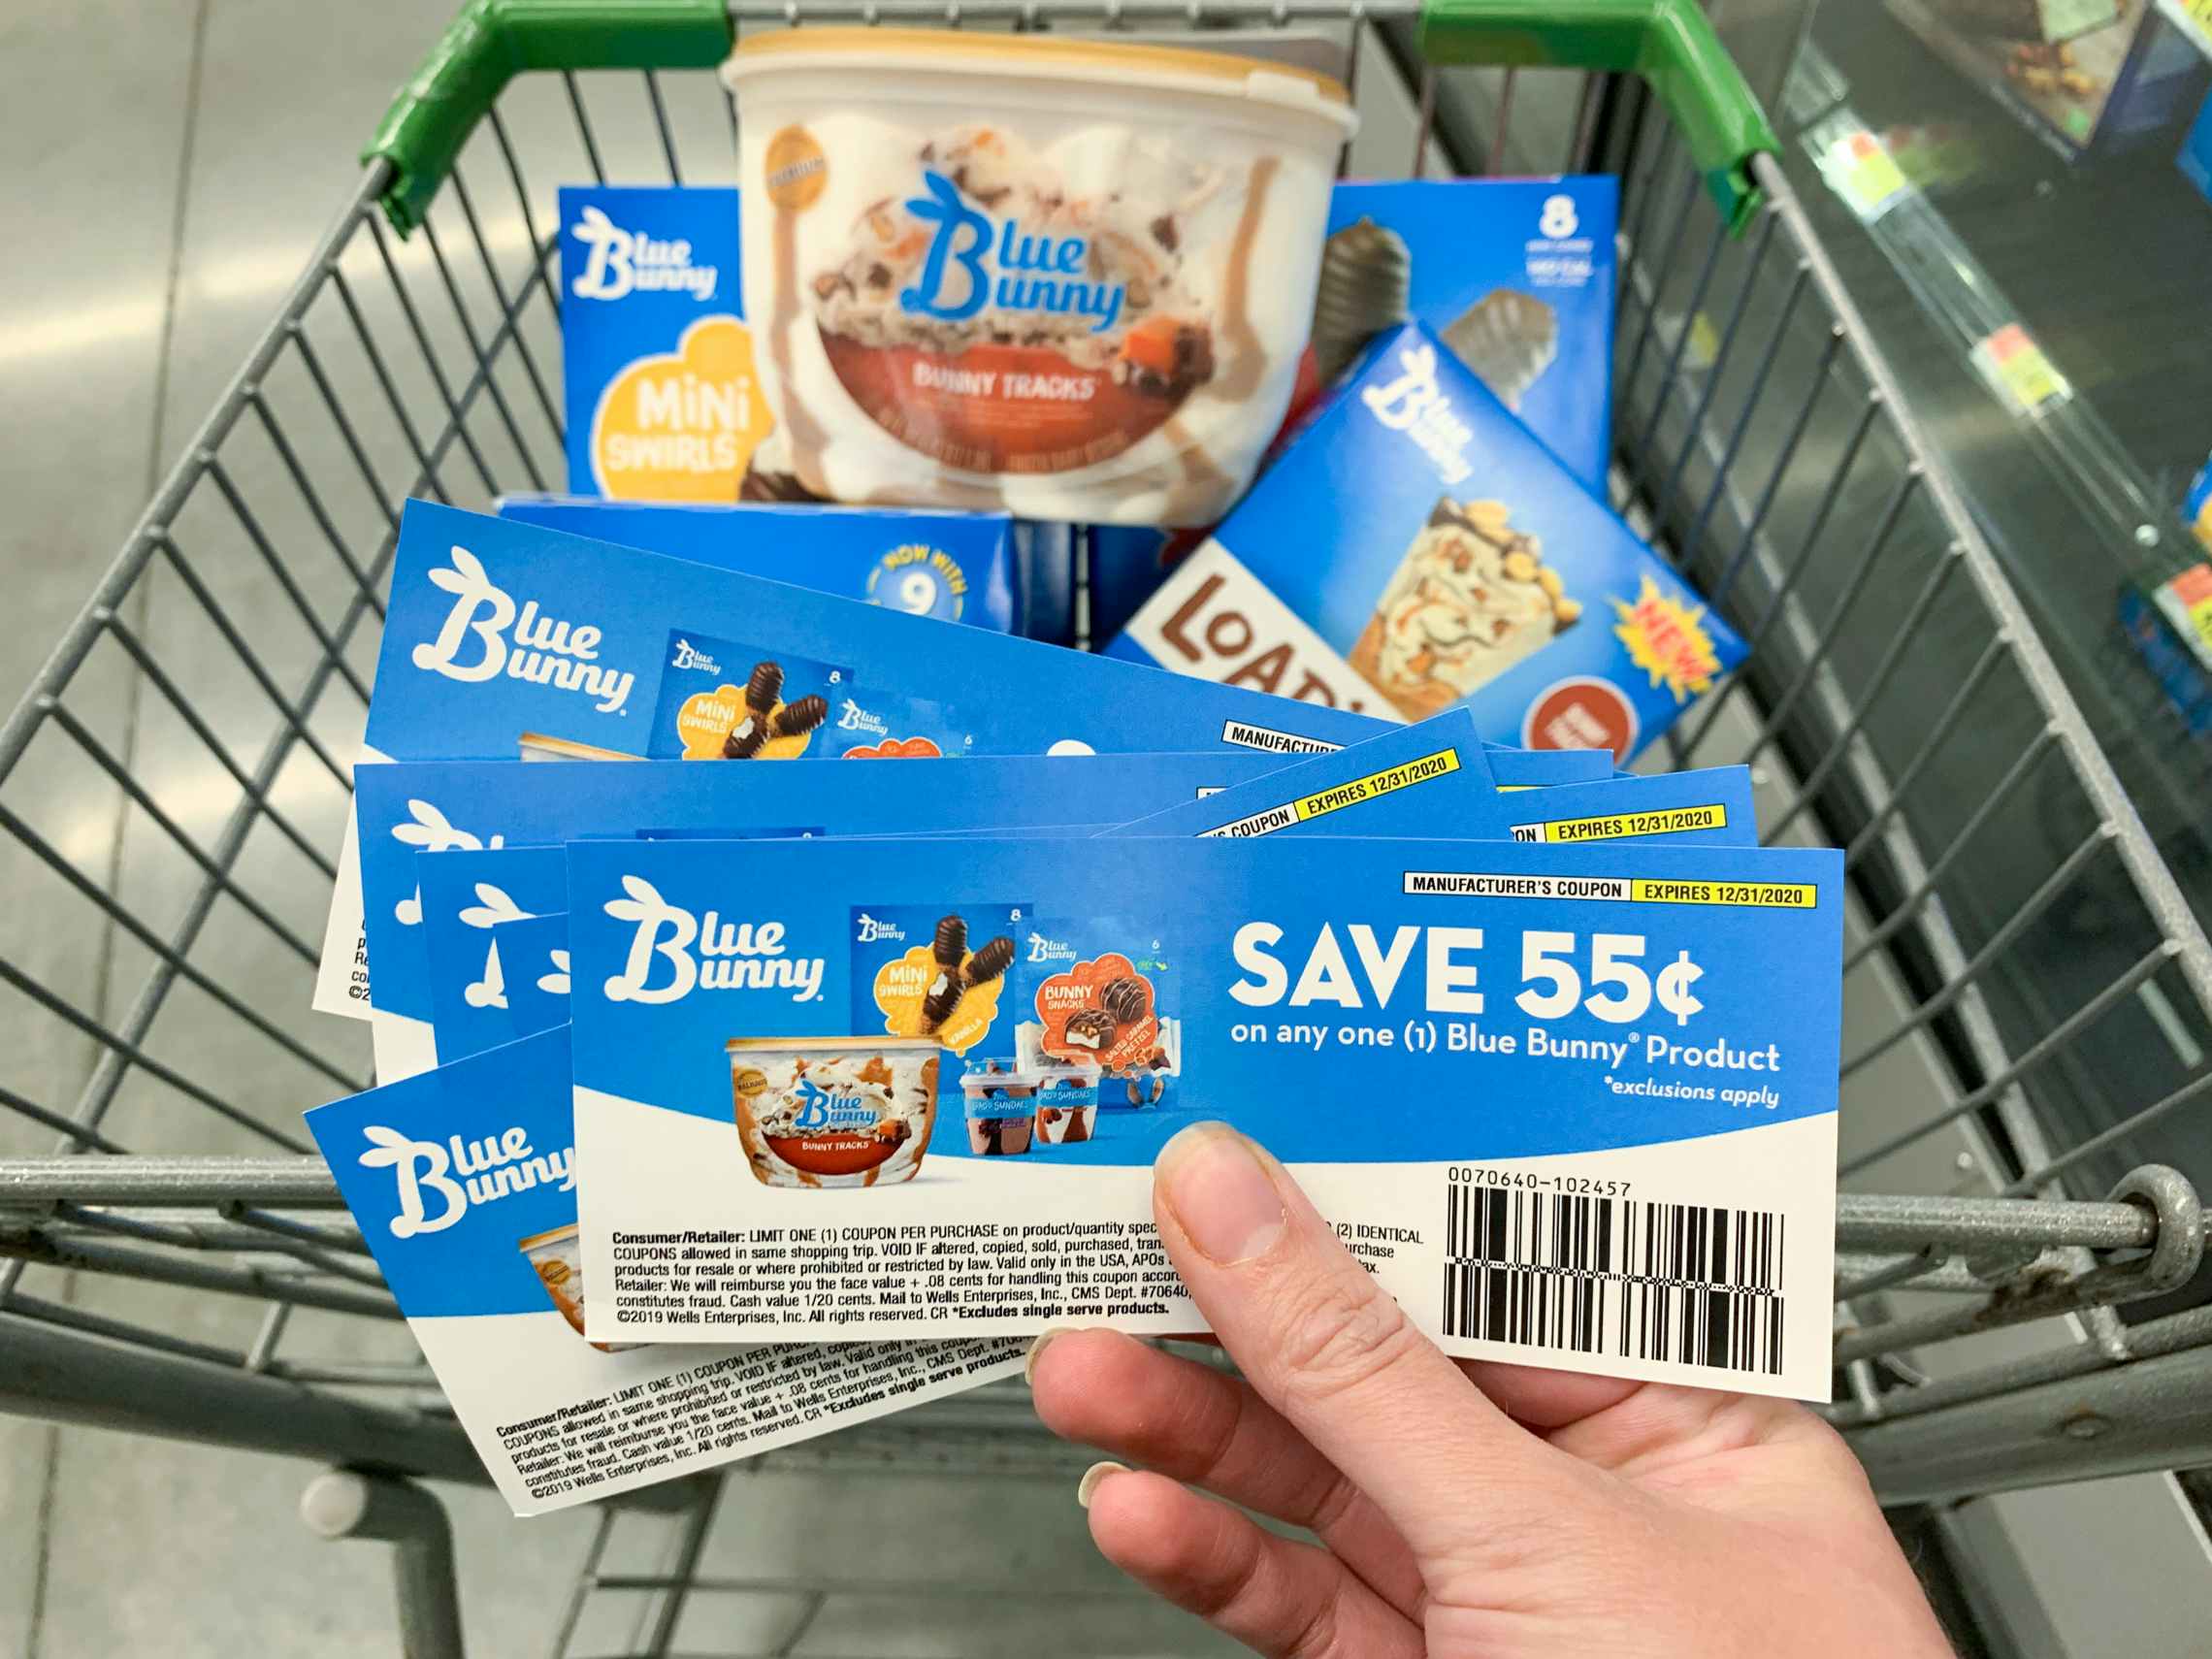 Blue Bunny Ice Cream coupons held in front of basket of ice cream treats.